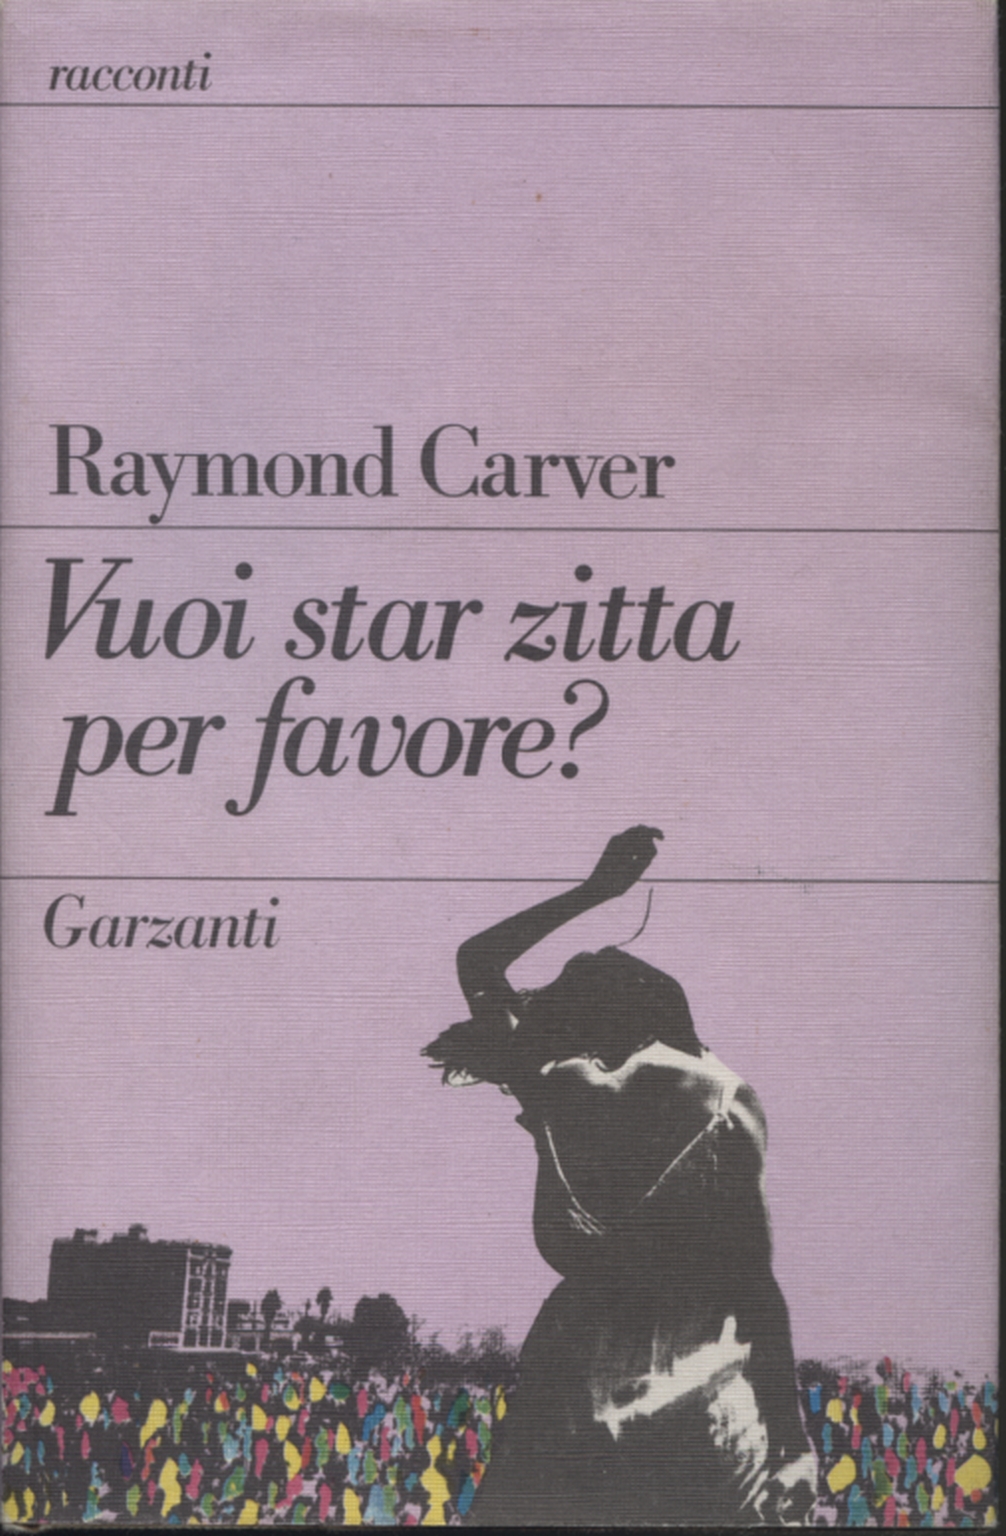 Do you want to be quiet, please, Raymond Carver